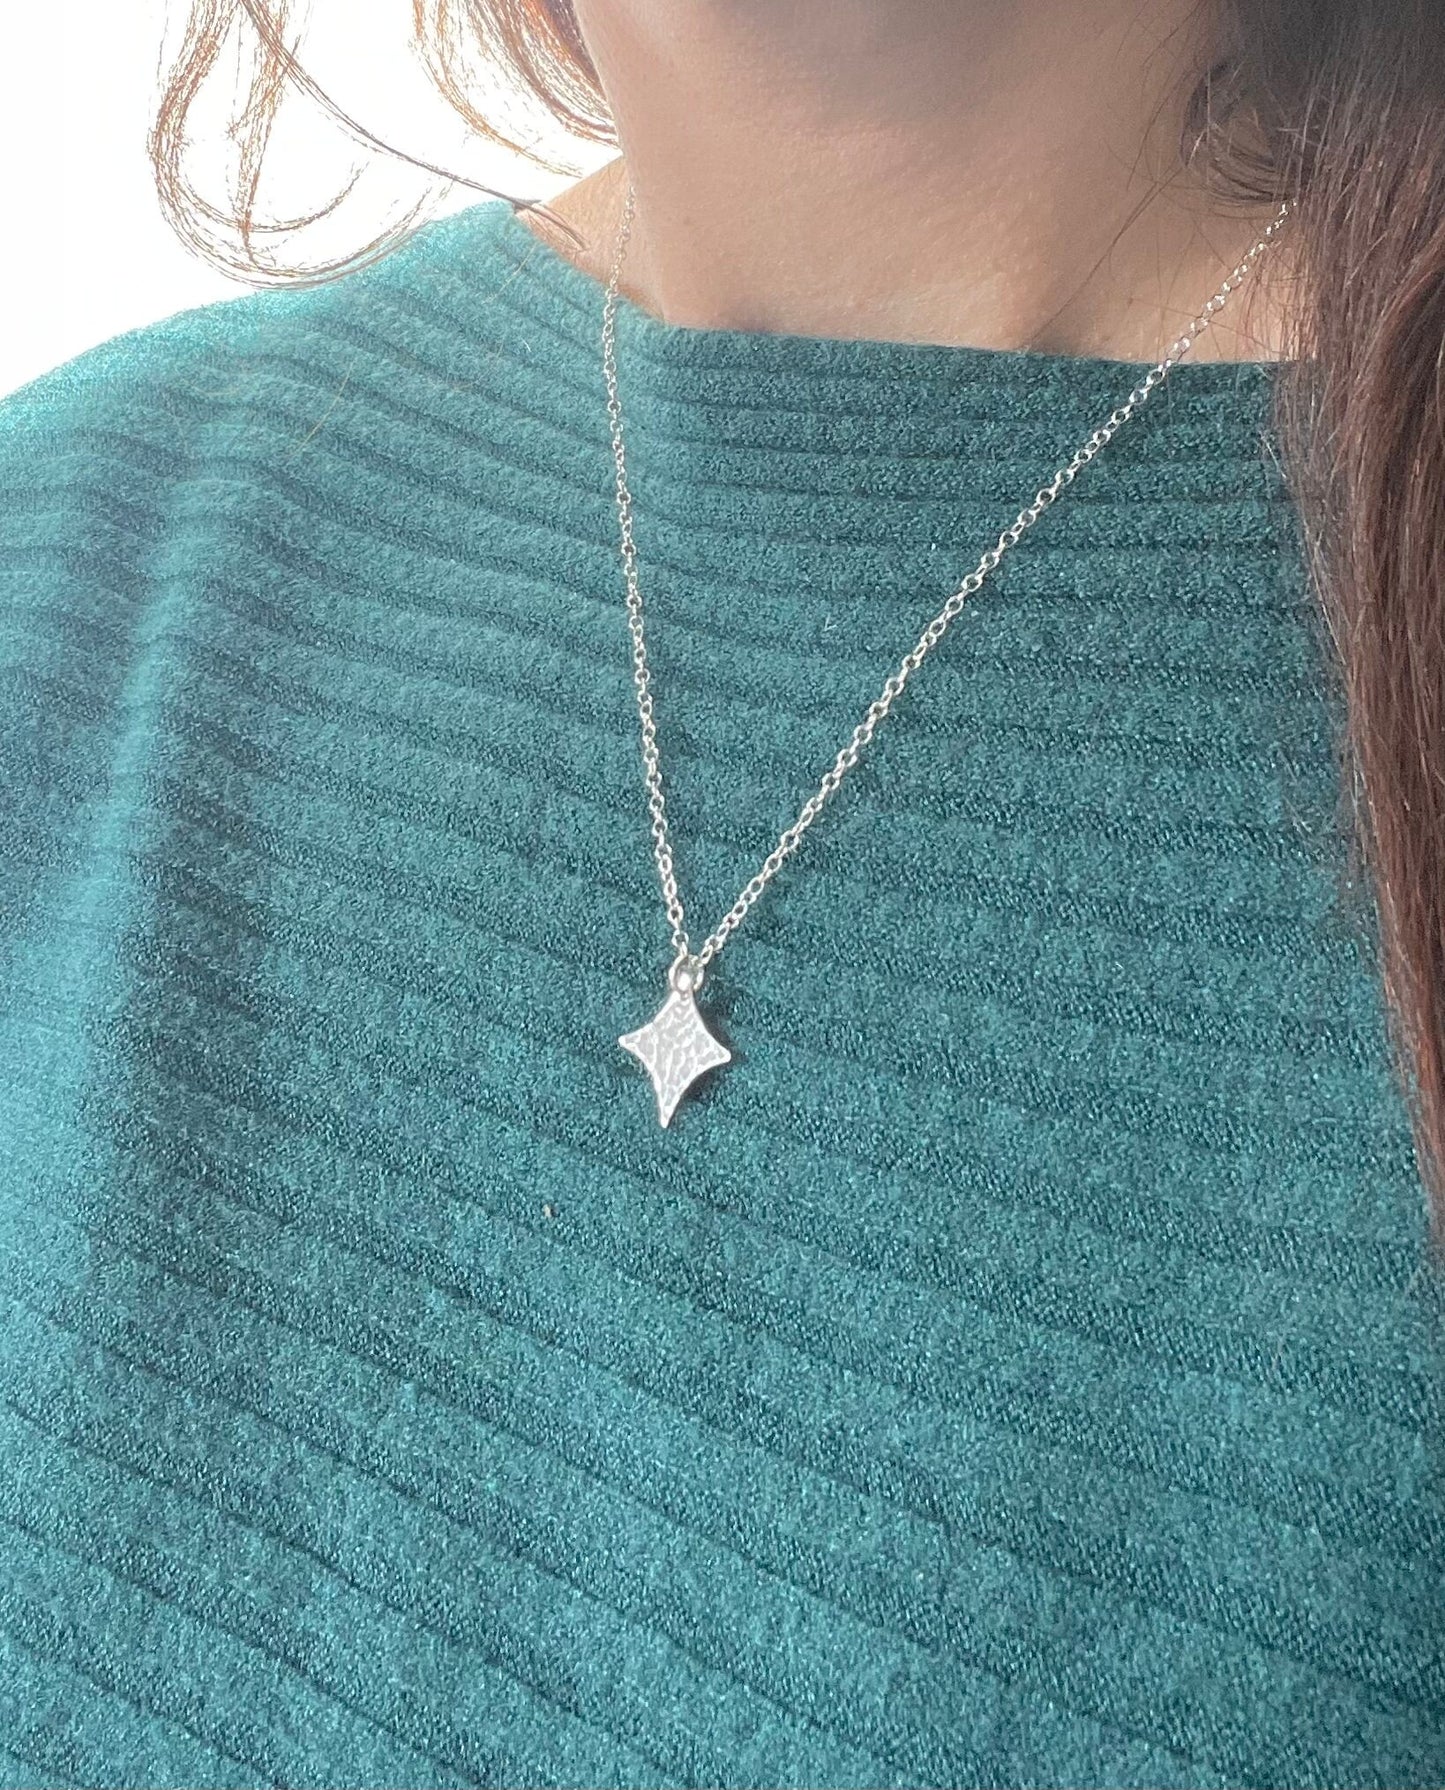 Silver North Star necklace, four point star necklace